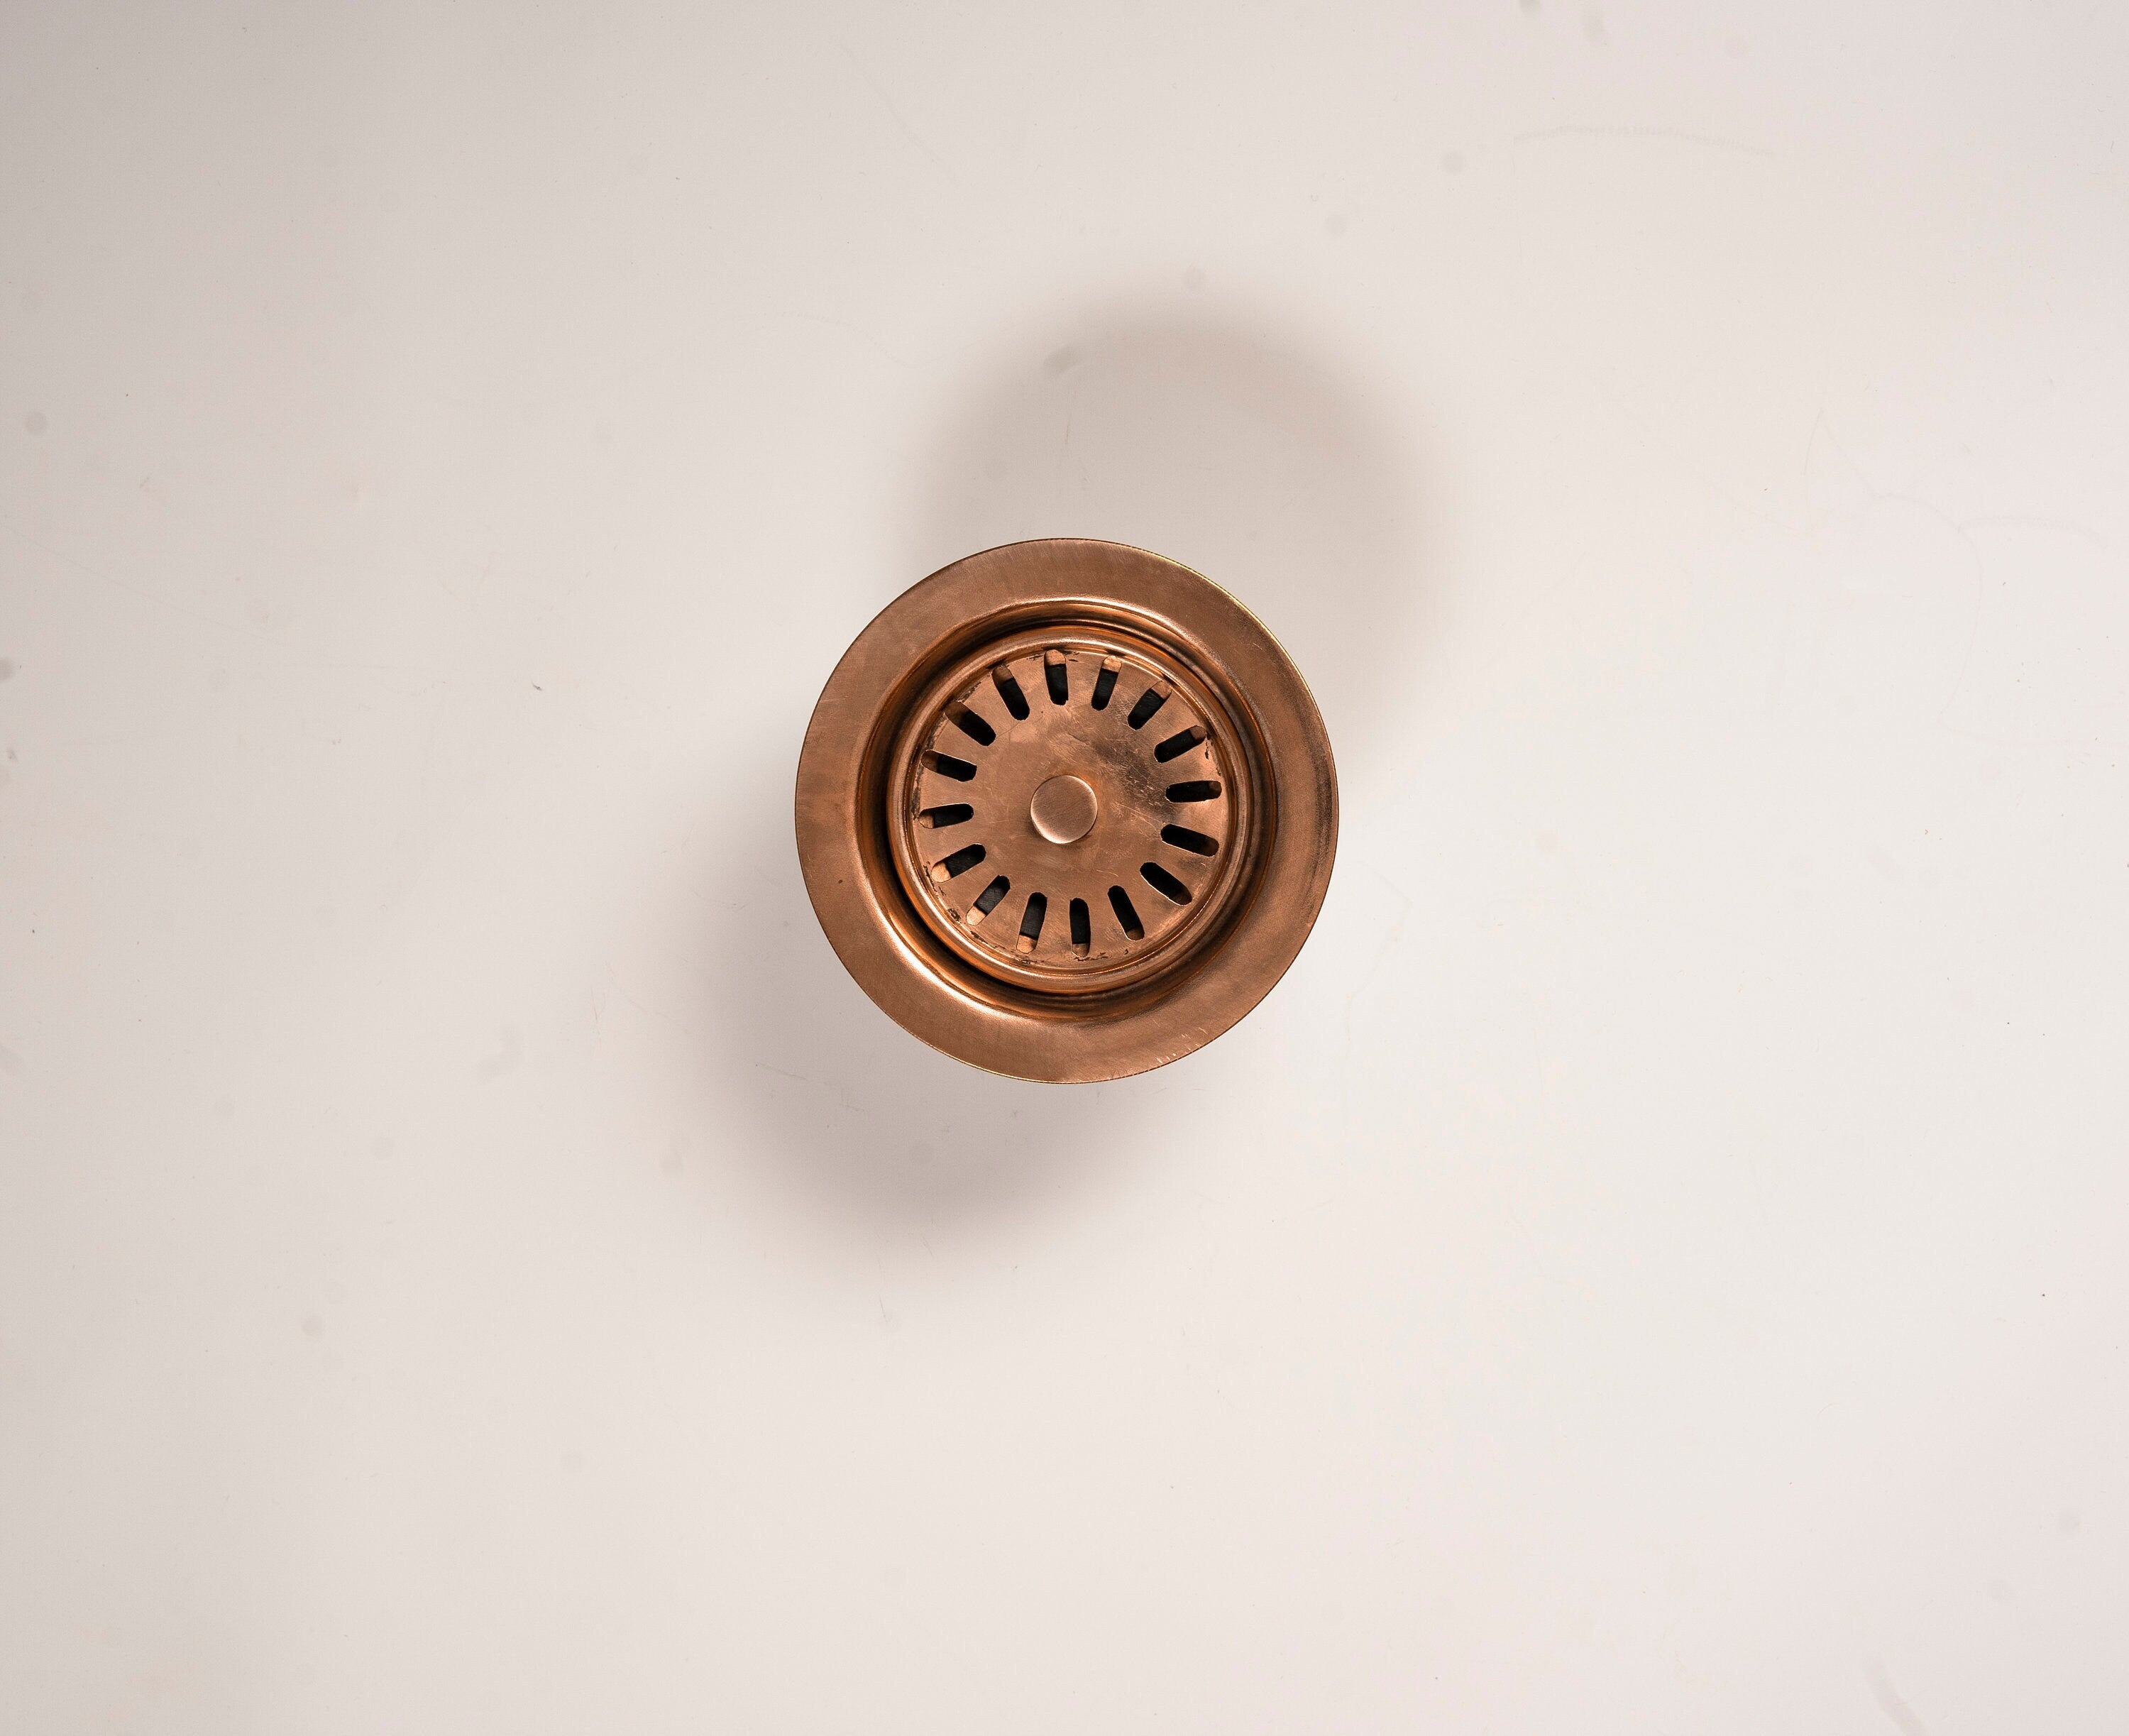 Copper Kitchen Sink Drain with a Basket Strainer Zayian